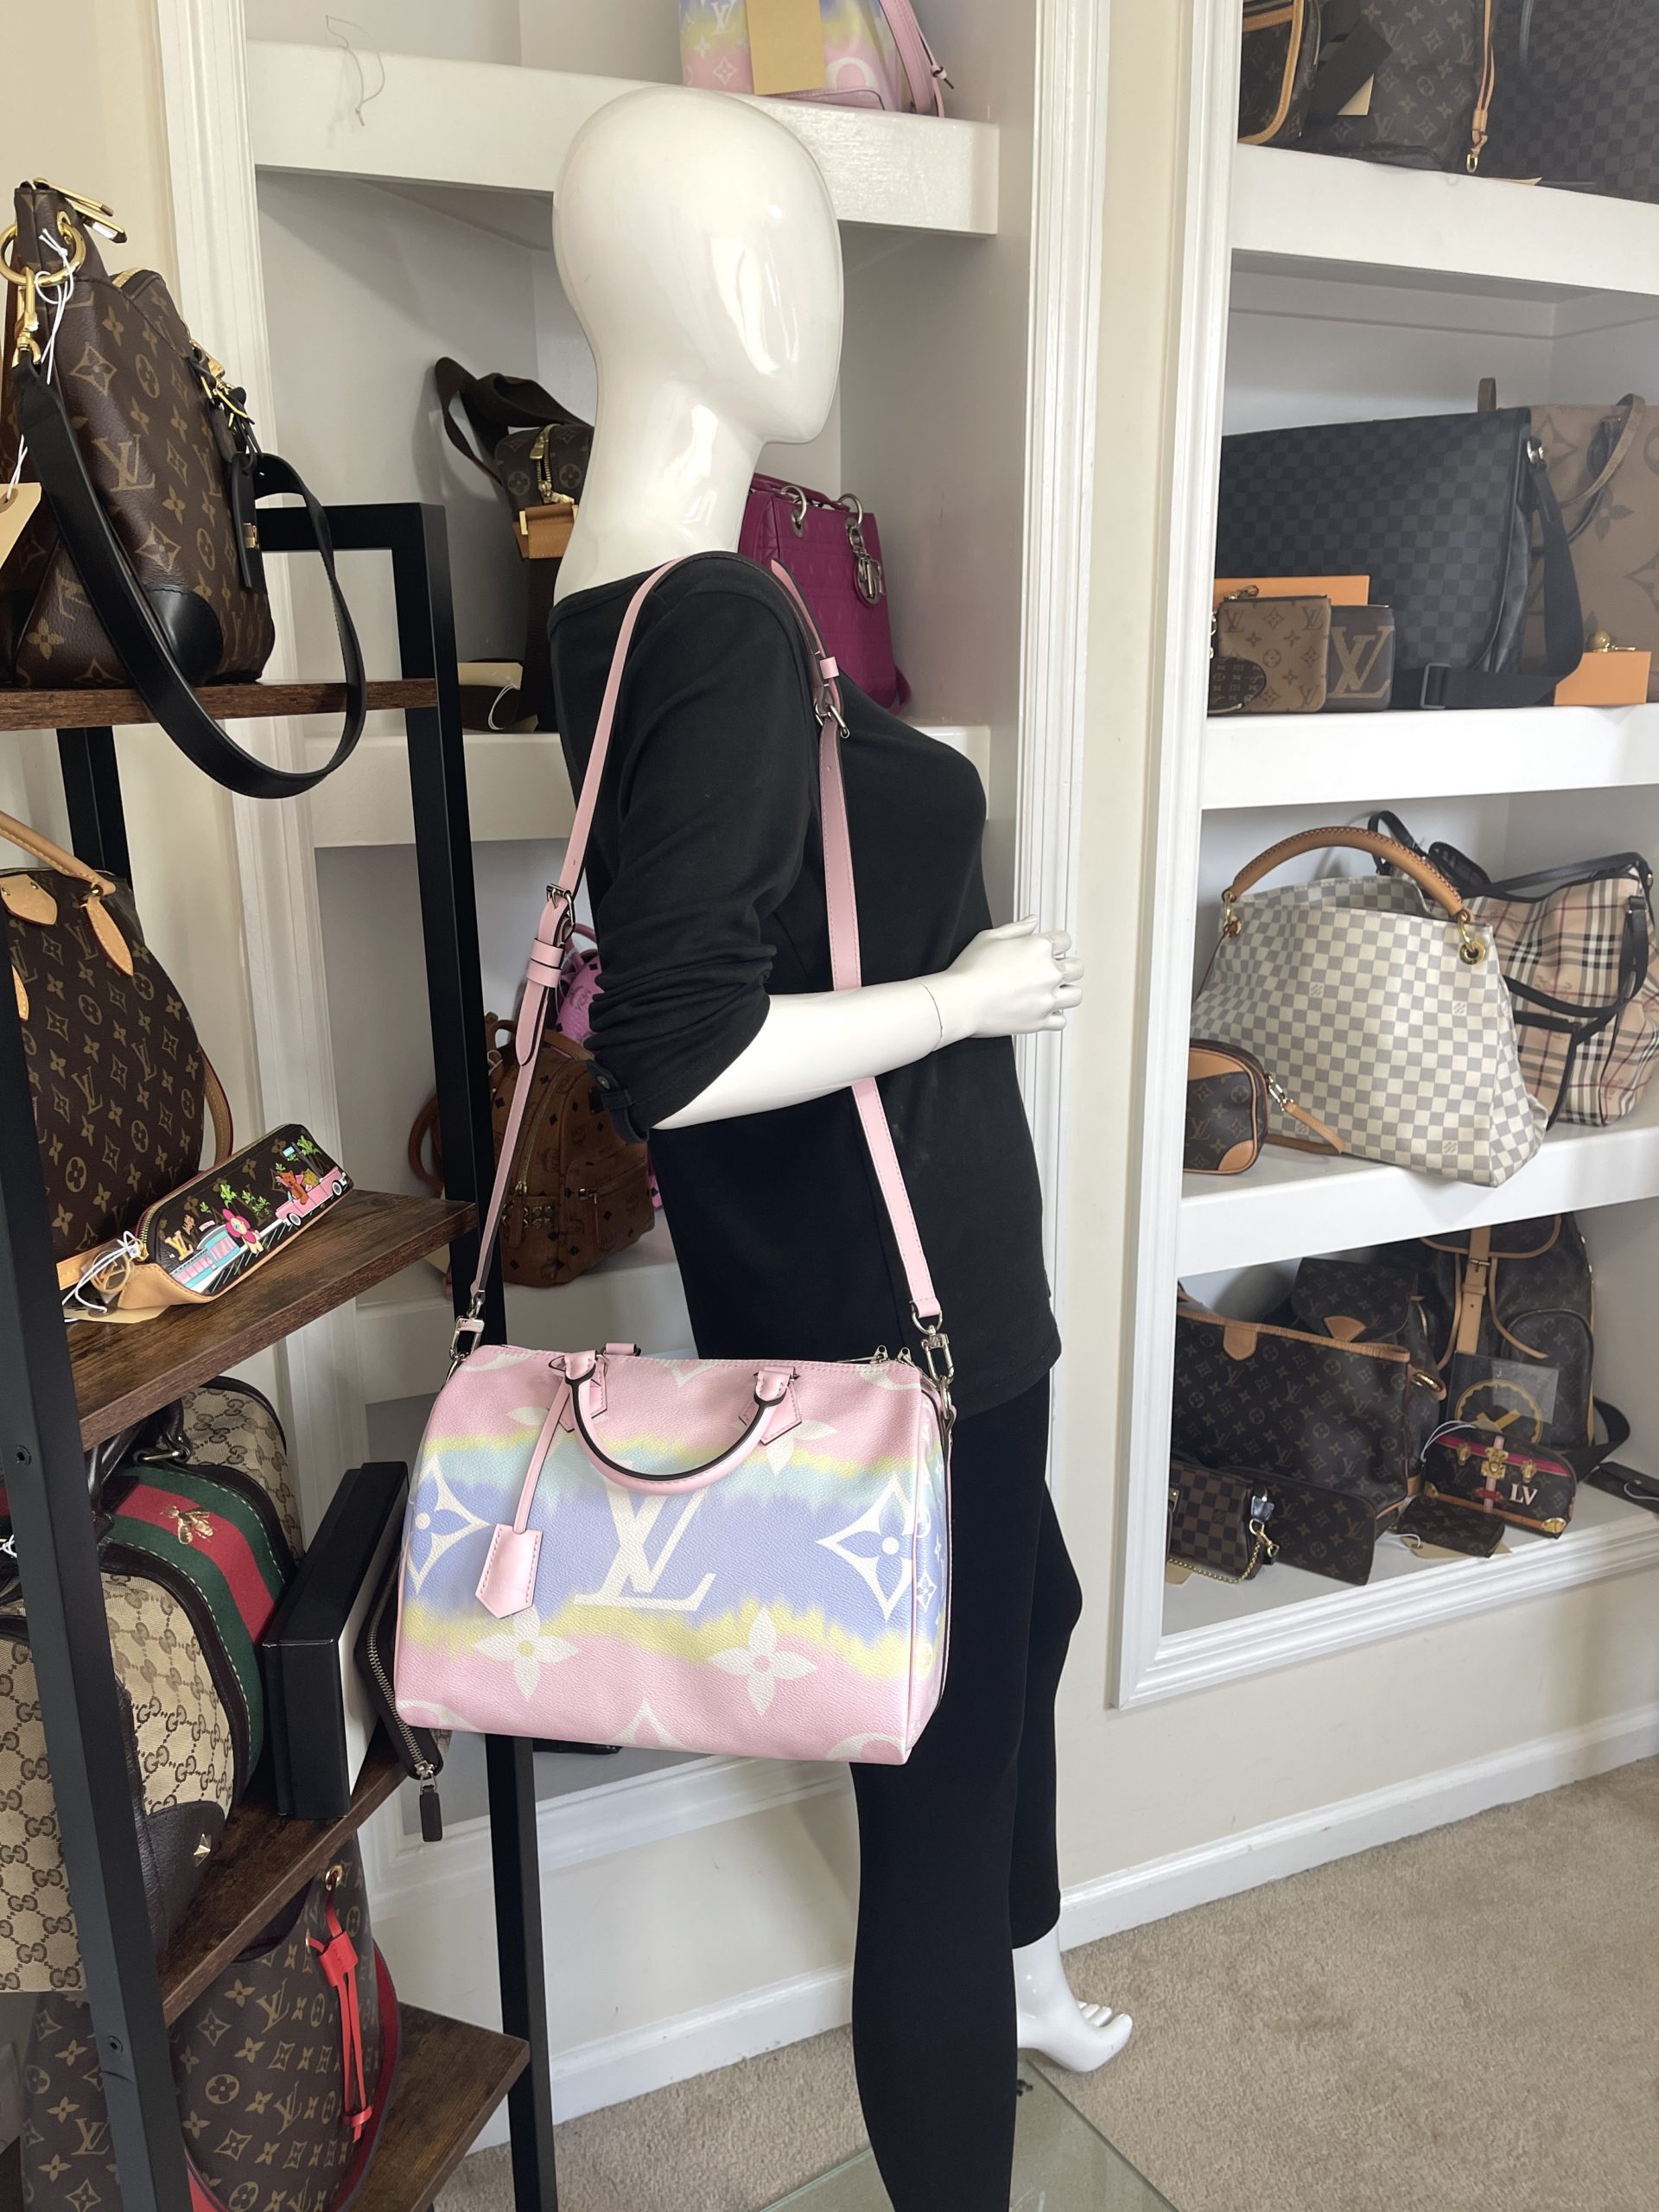 Louis Vuitton Pink Escale Collection Speedy 30 Bandouliere in